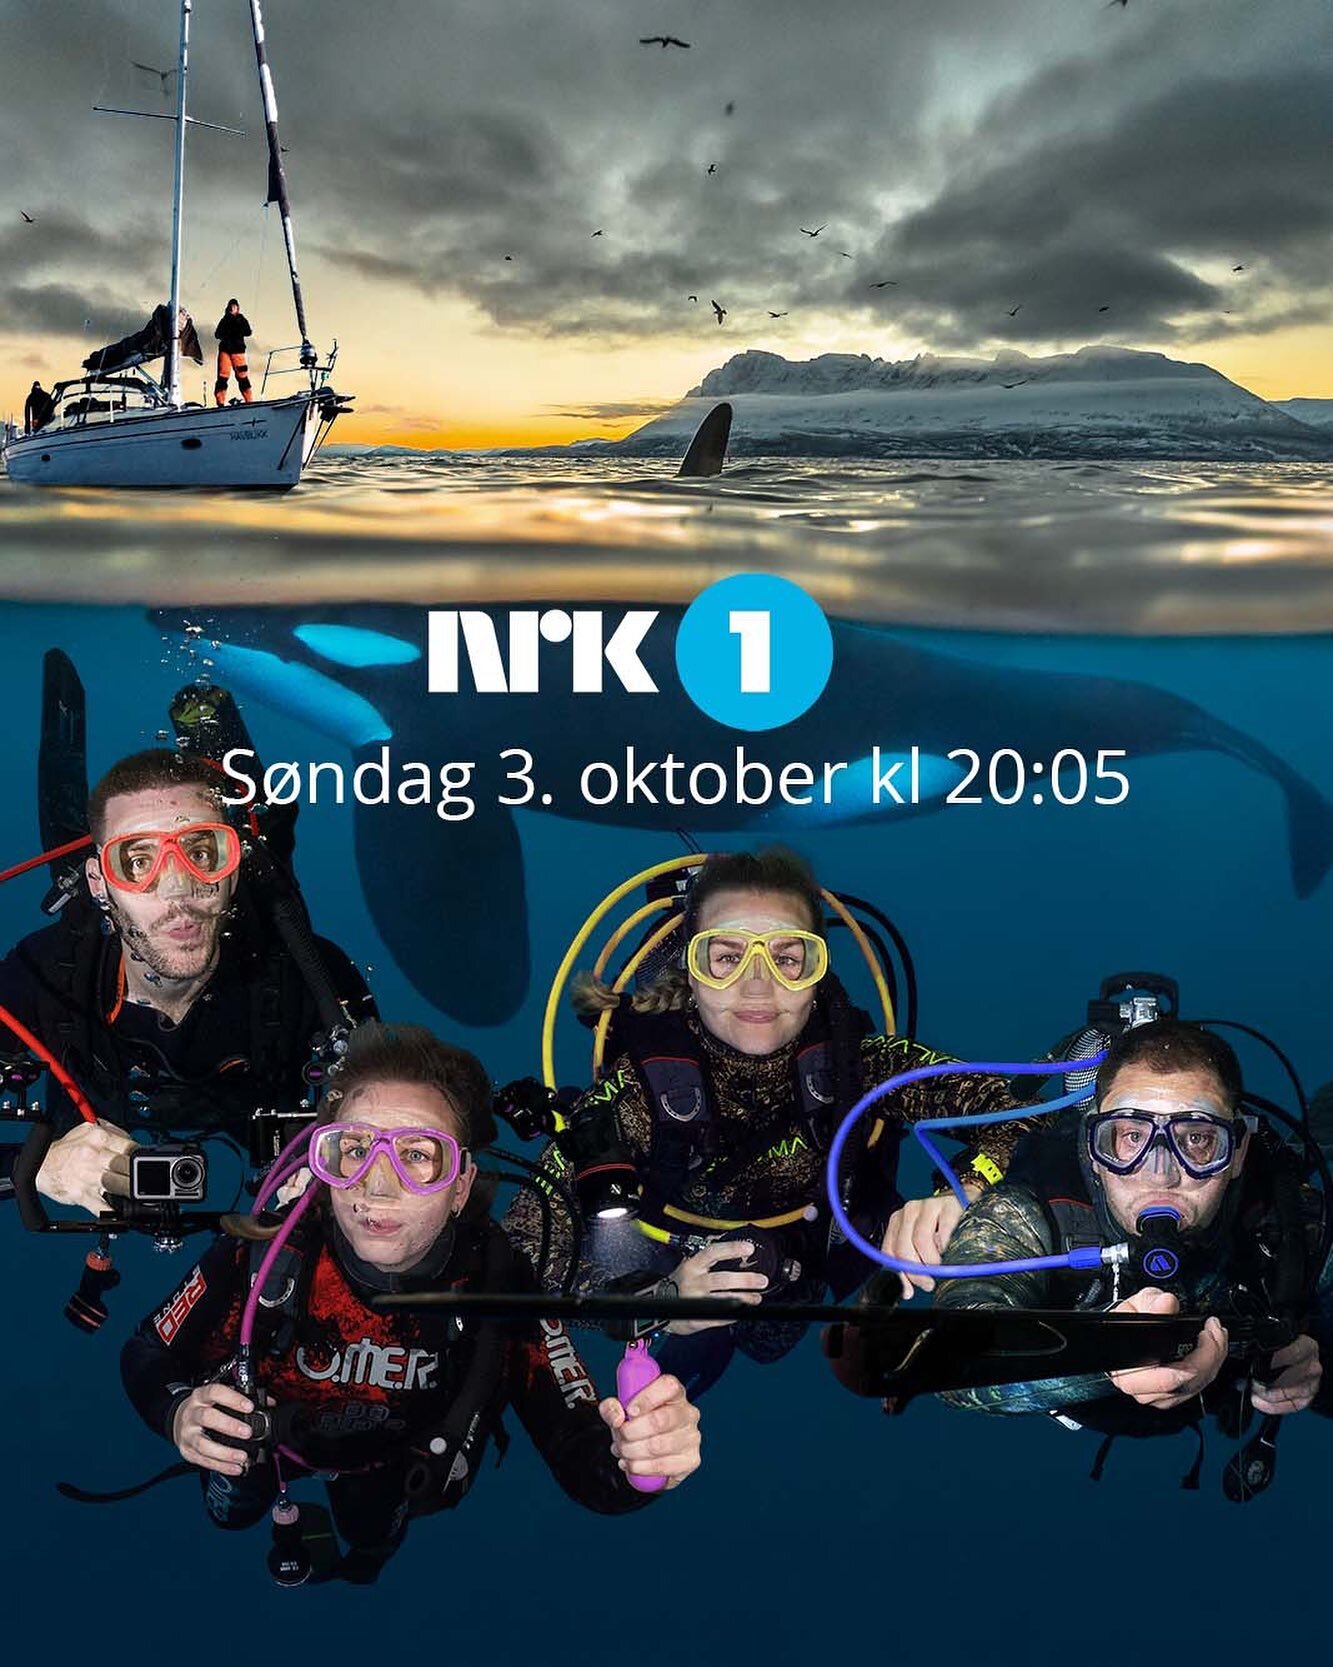 After over three years in the making, our TV-series is finally ready for airing!😅

Me, @henrikkehaugan , @hannahunnesviken and @olehammeroy spent a whole year on a sailboat documenting our adventures and life underwater along the Norwegian coast. 

